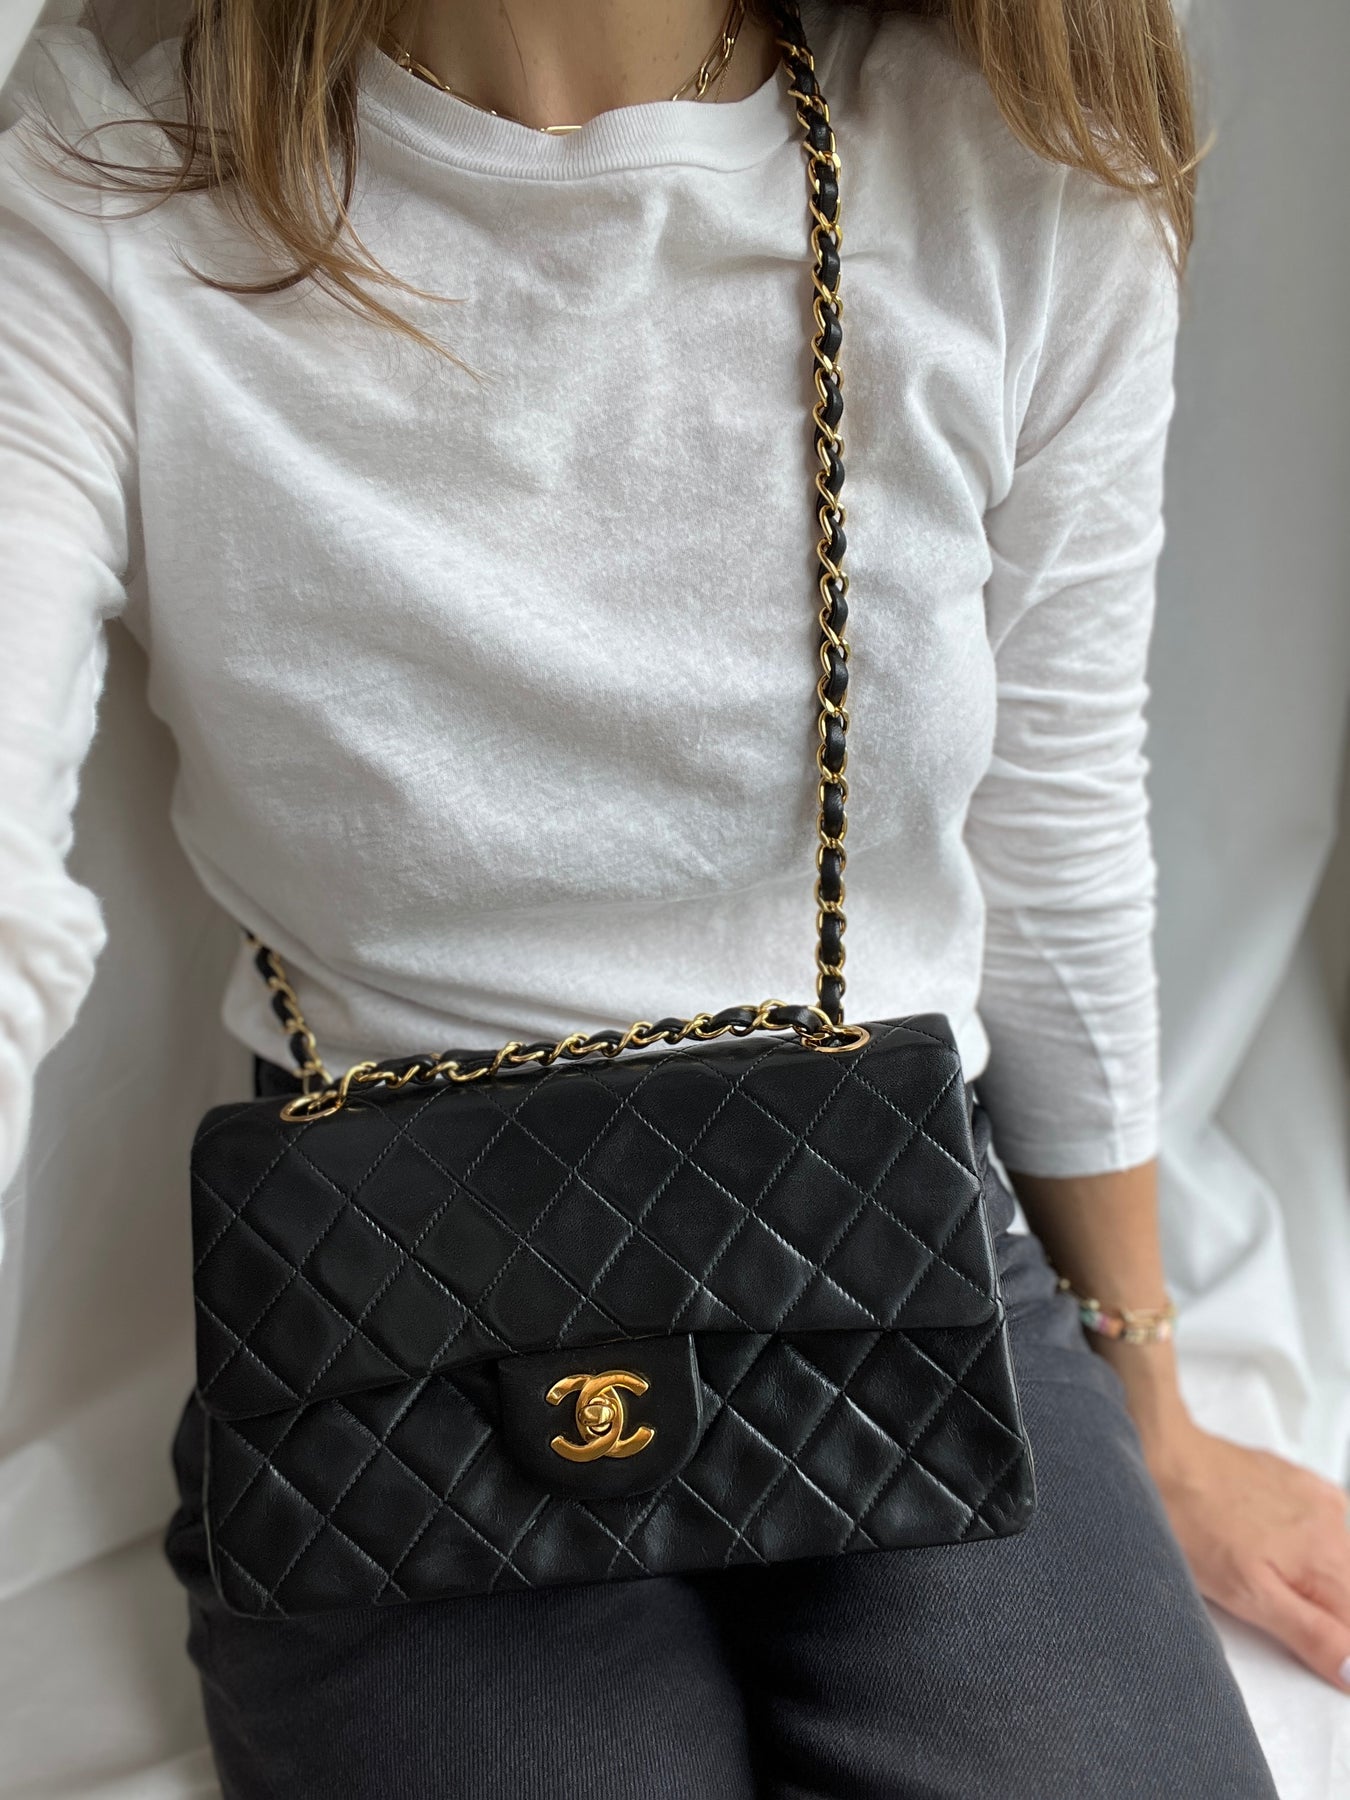 Chanel Classic Double Flap Bag Small